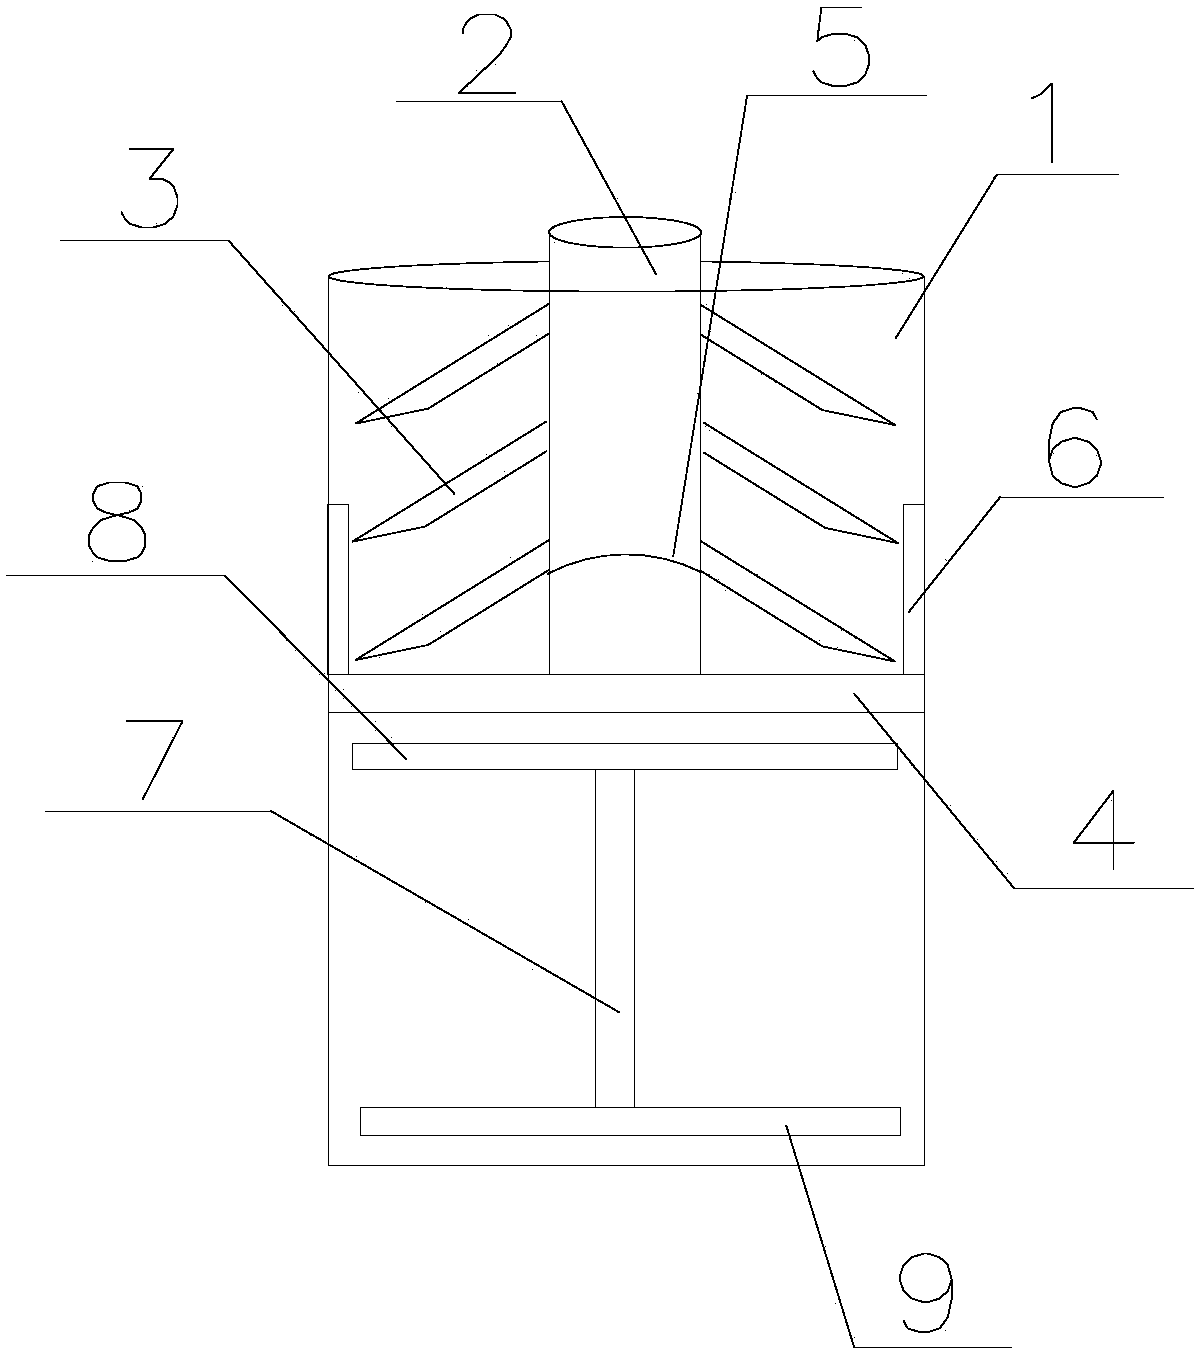 Novel natural product filtering device